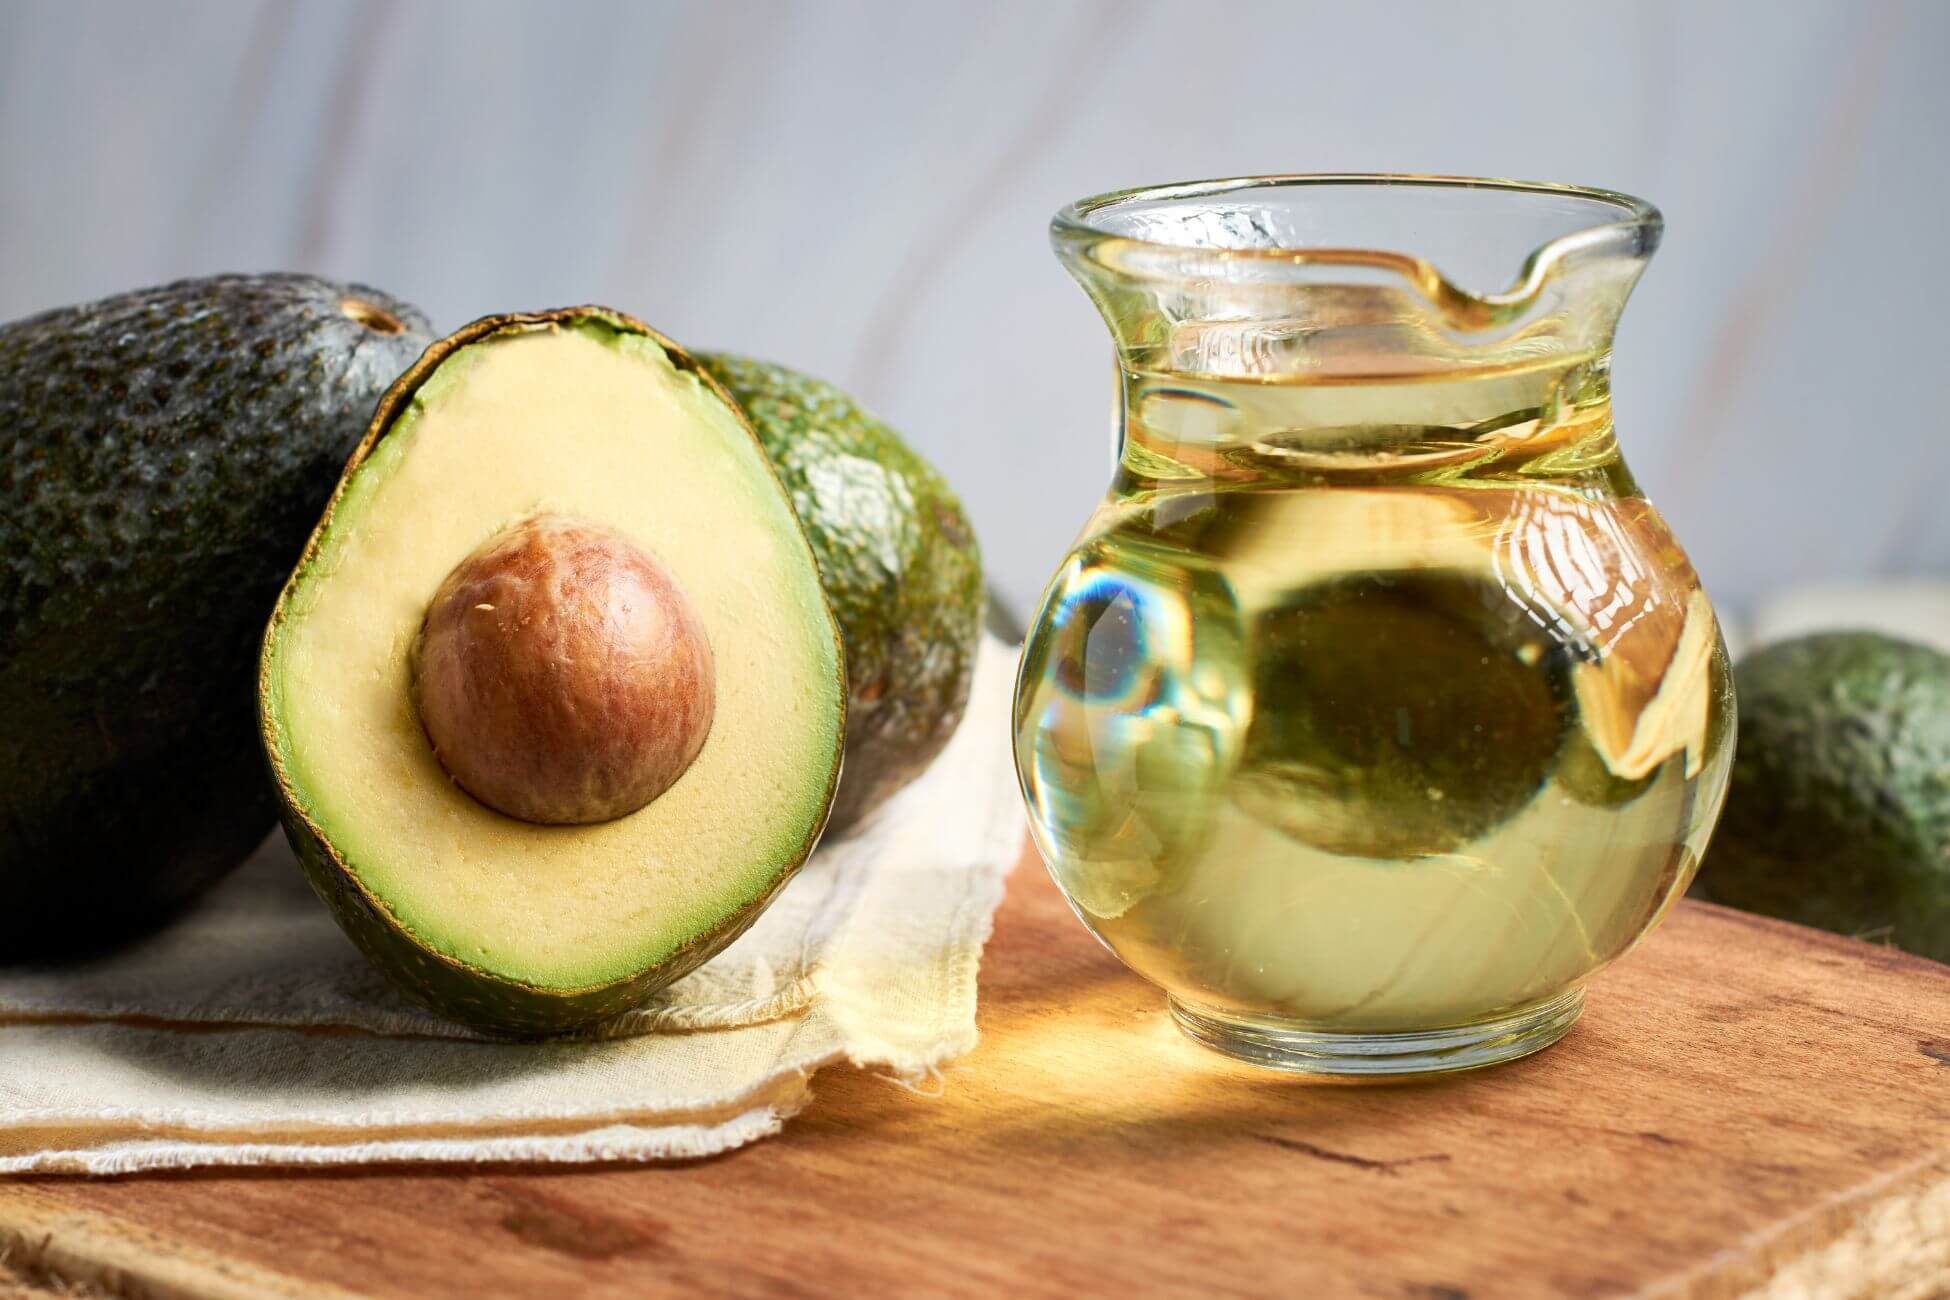 A glass jar filled with clear avocado oil sits on a wooden surface next to a halved avocado.